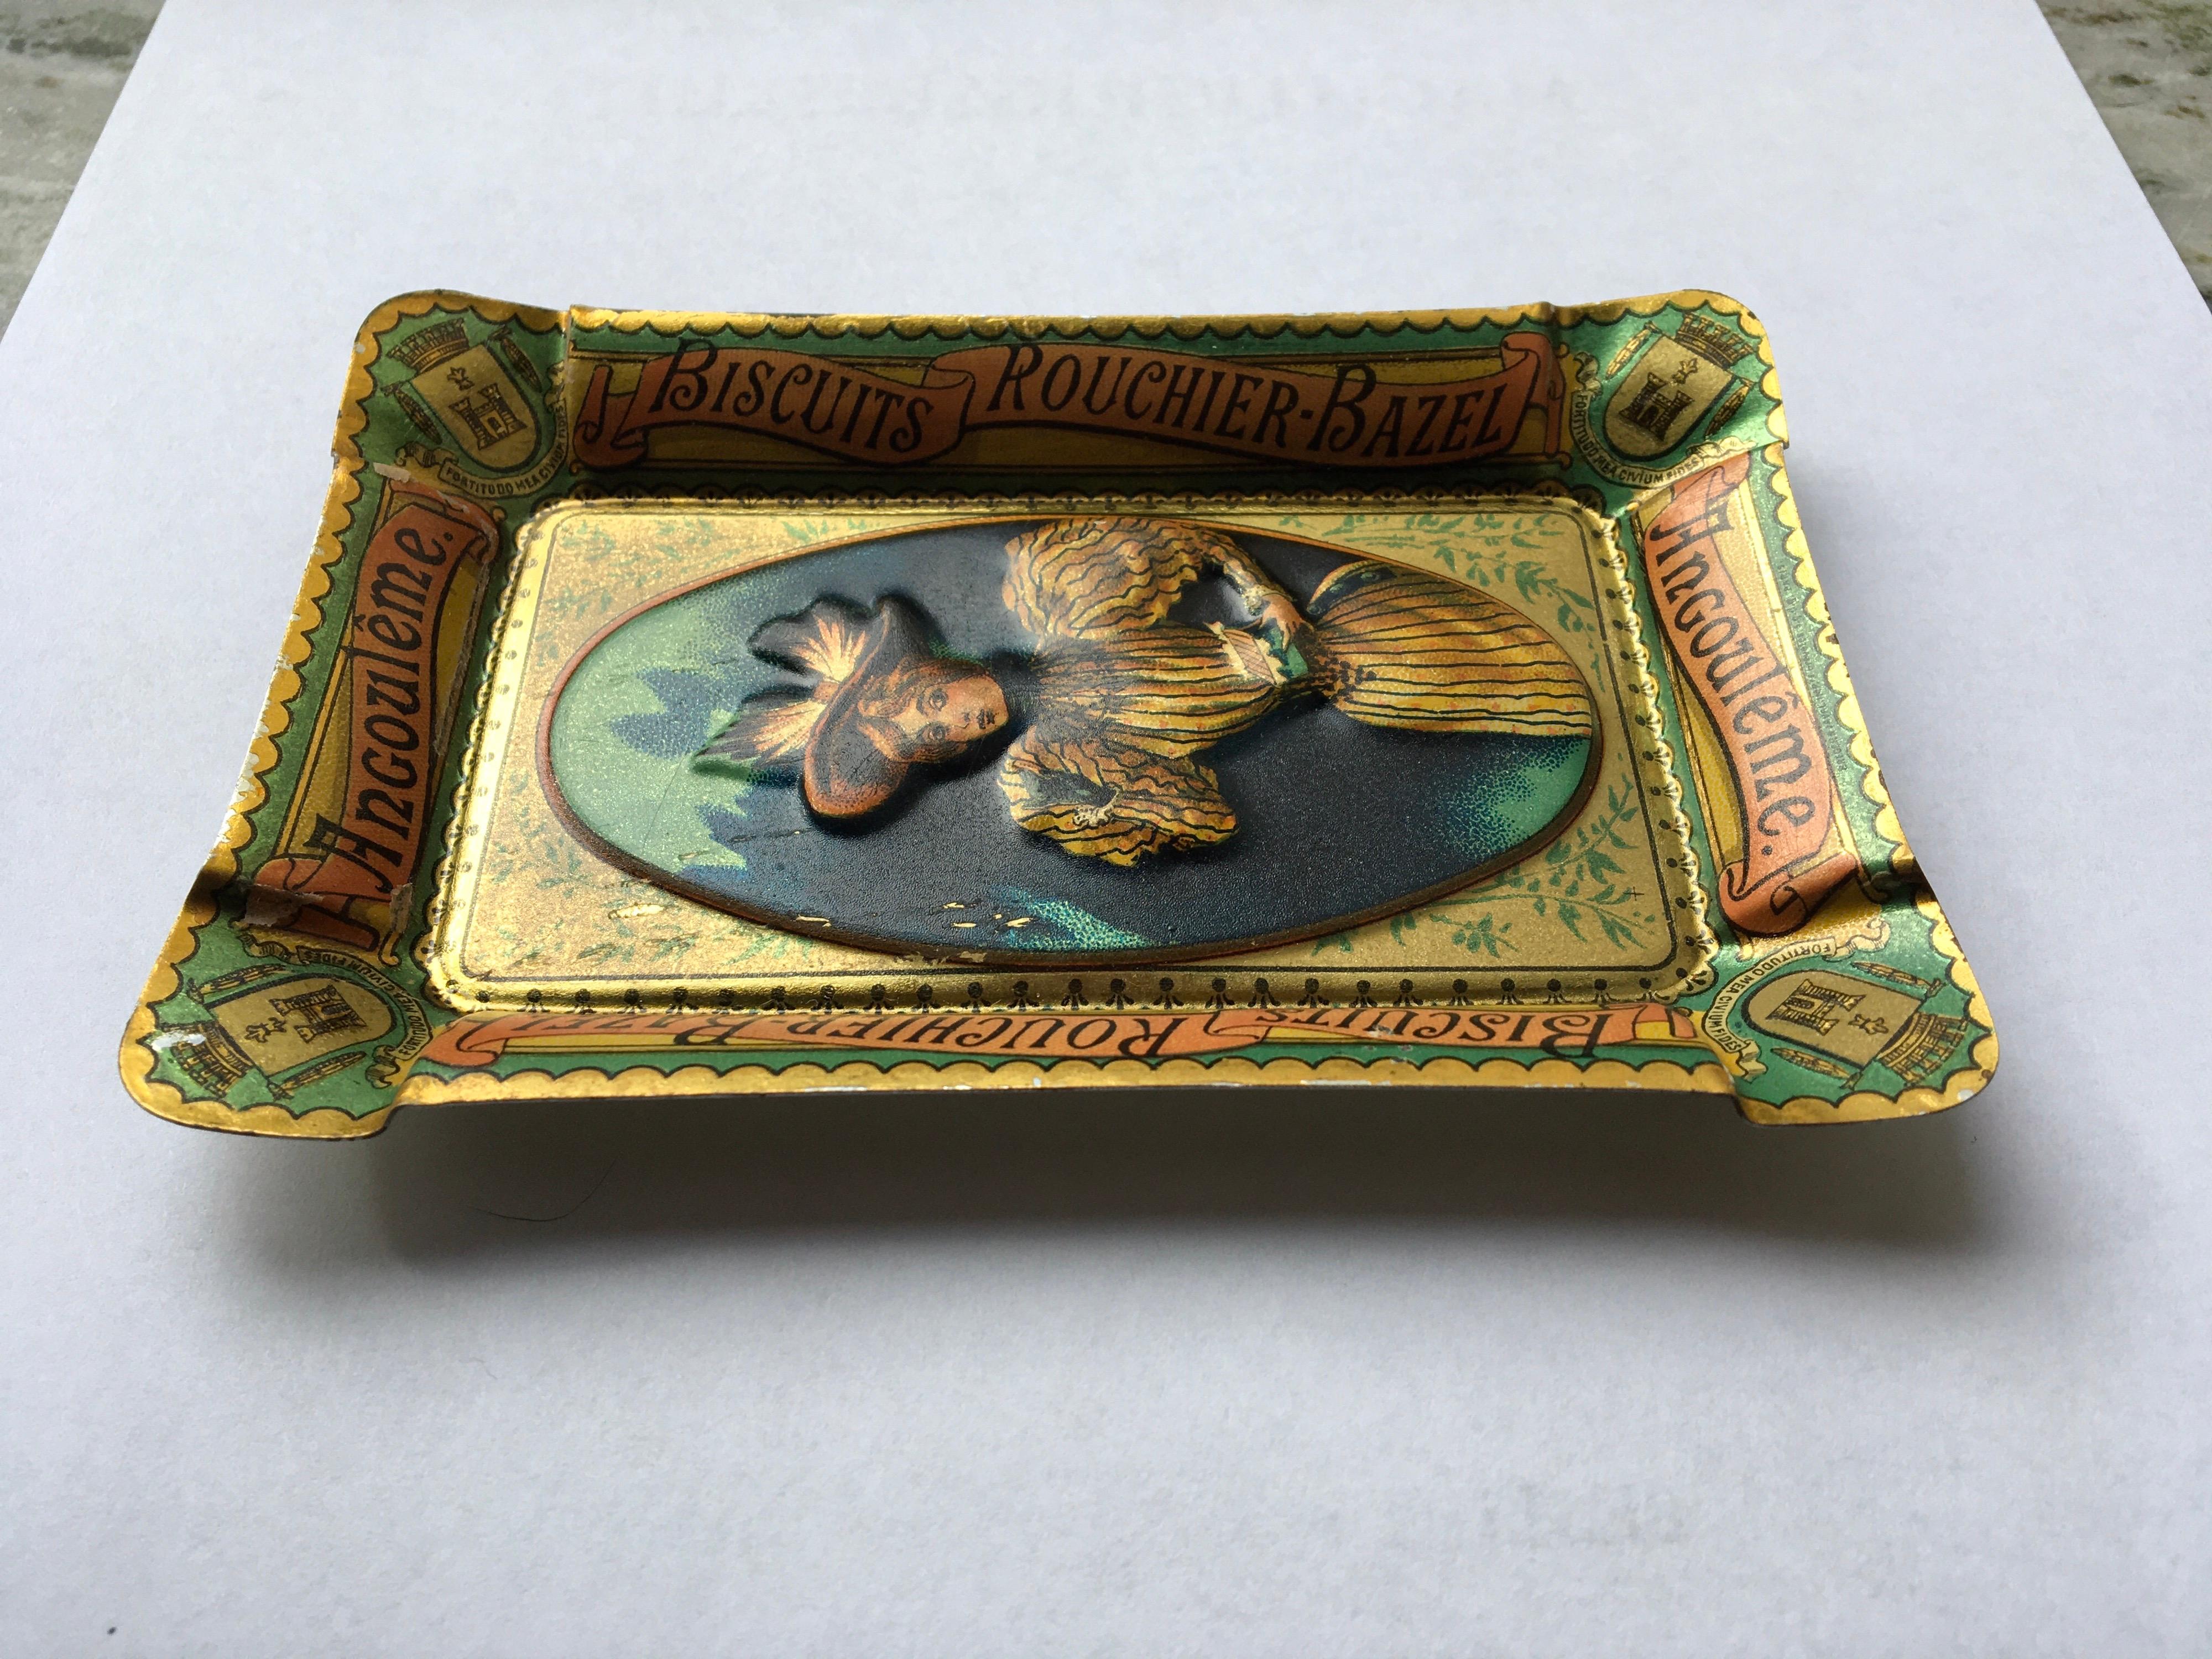 Antique Litho Tin Tray or Ashtray for Biscuits Rouchier Bazel France, circa 1900 5